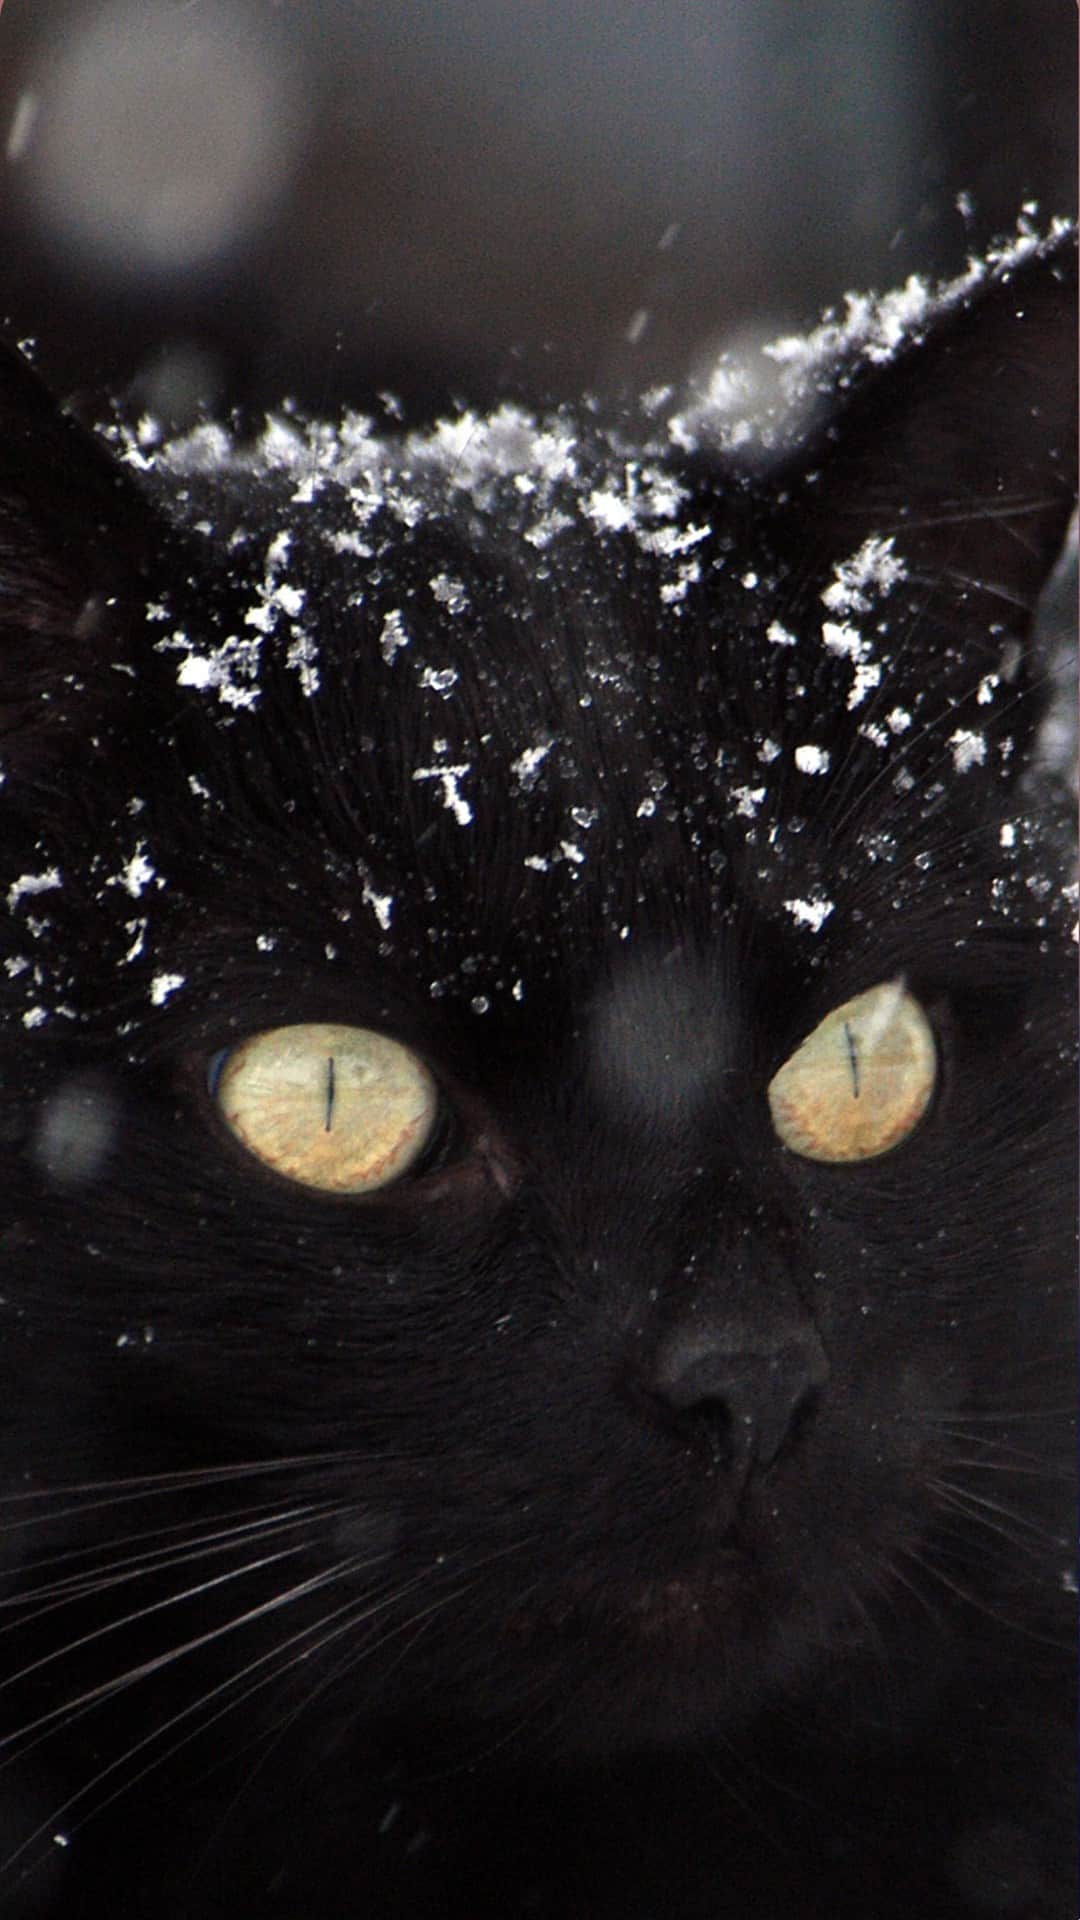 A black cat with snow on its fur - Cat